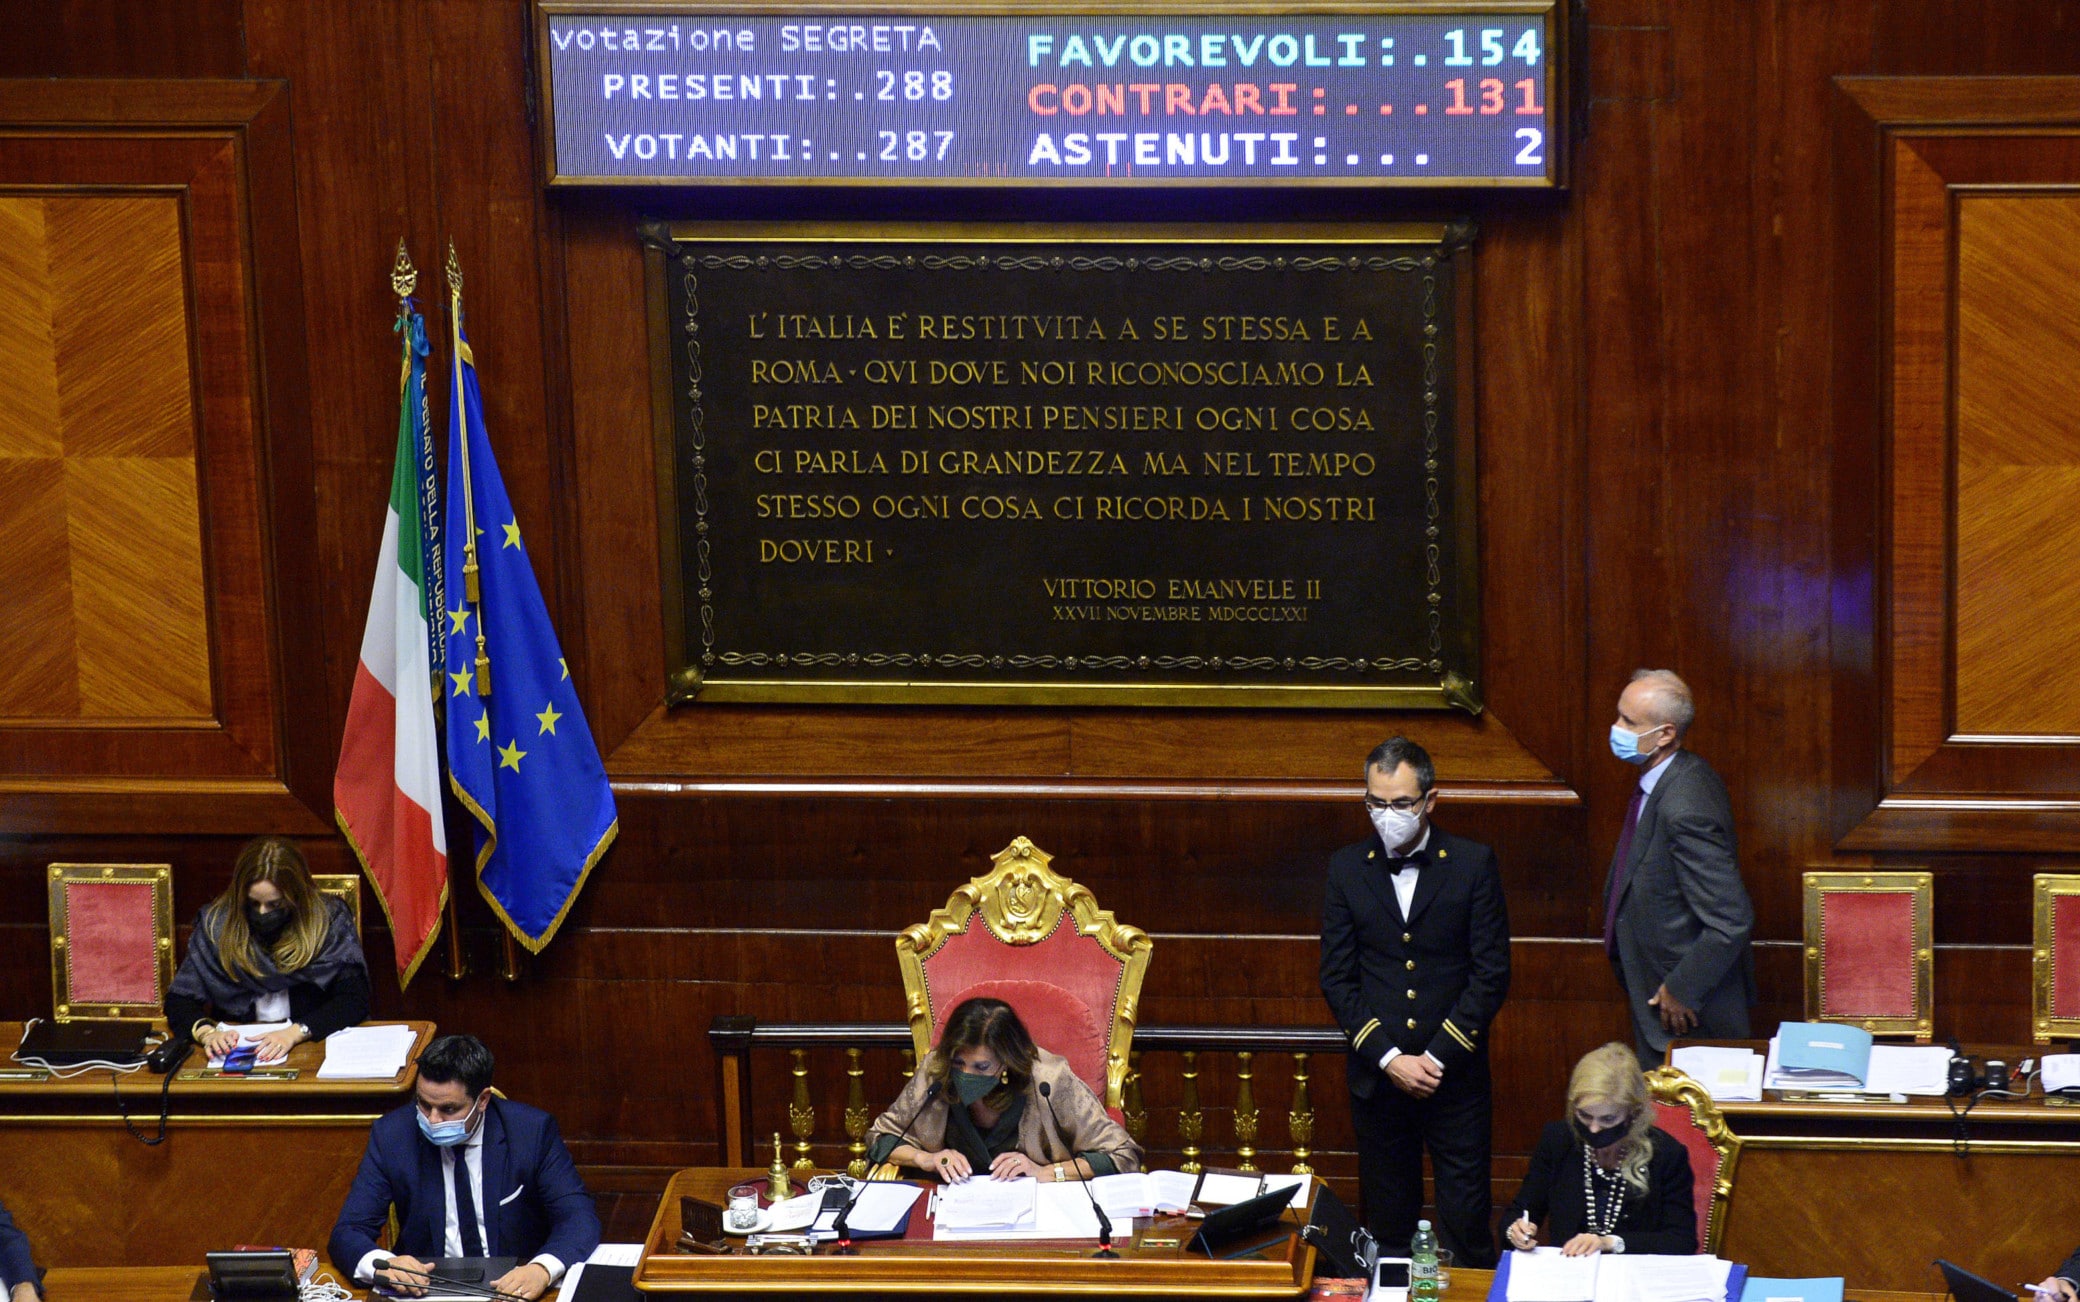 Zan’s bill rejected in the Senate, Lega and Fdi trap approved.  Tension between the Democratic Party and the Renzians